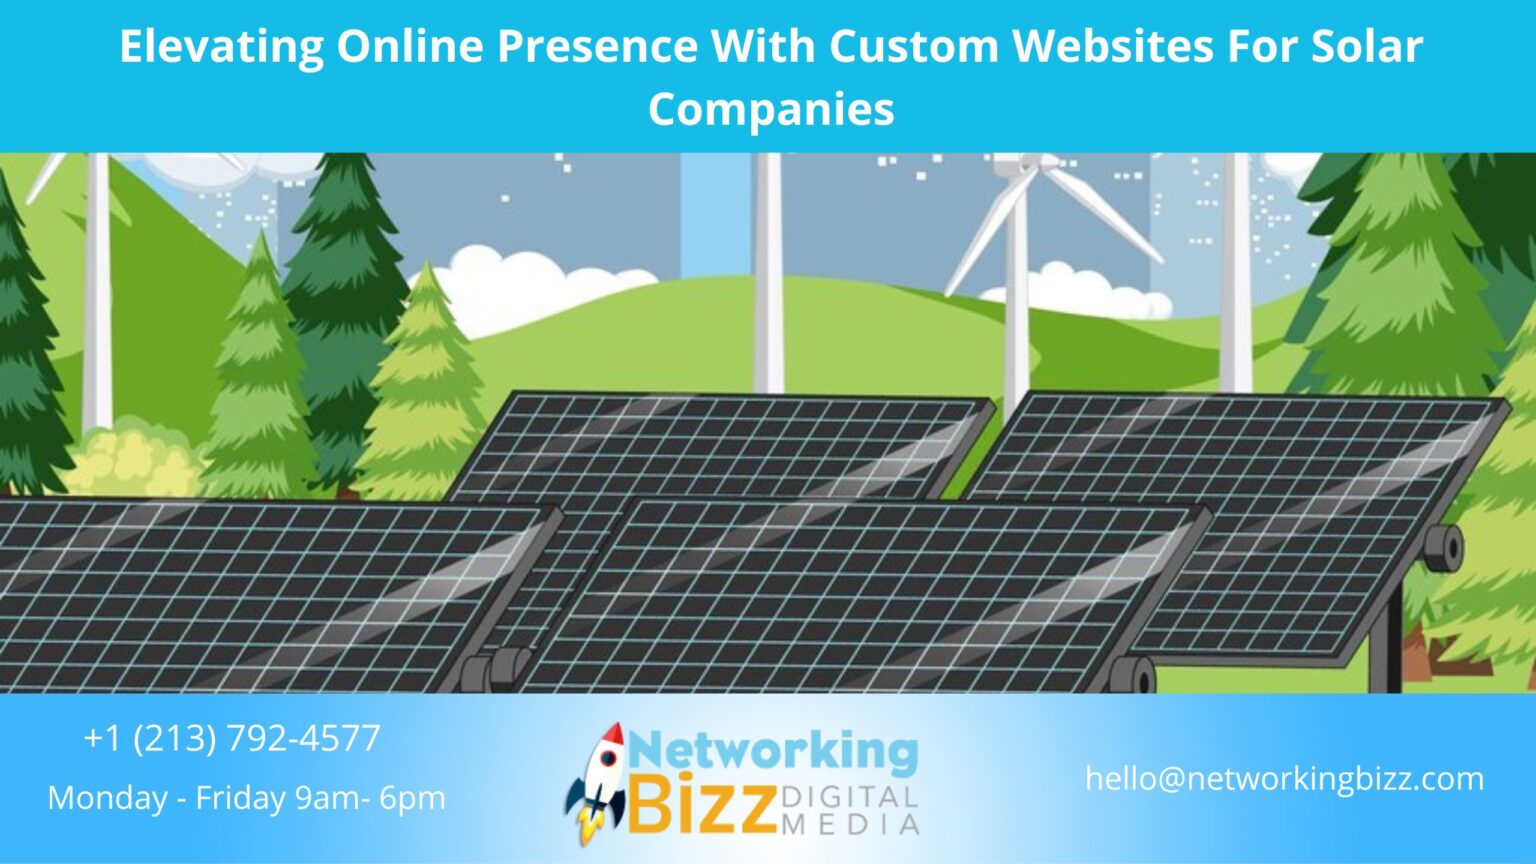 Elevating Online Presence With Custom Websites For Solar Companies